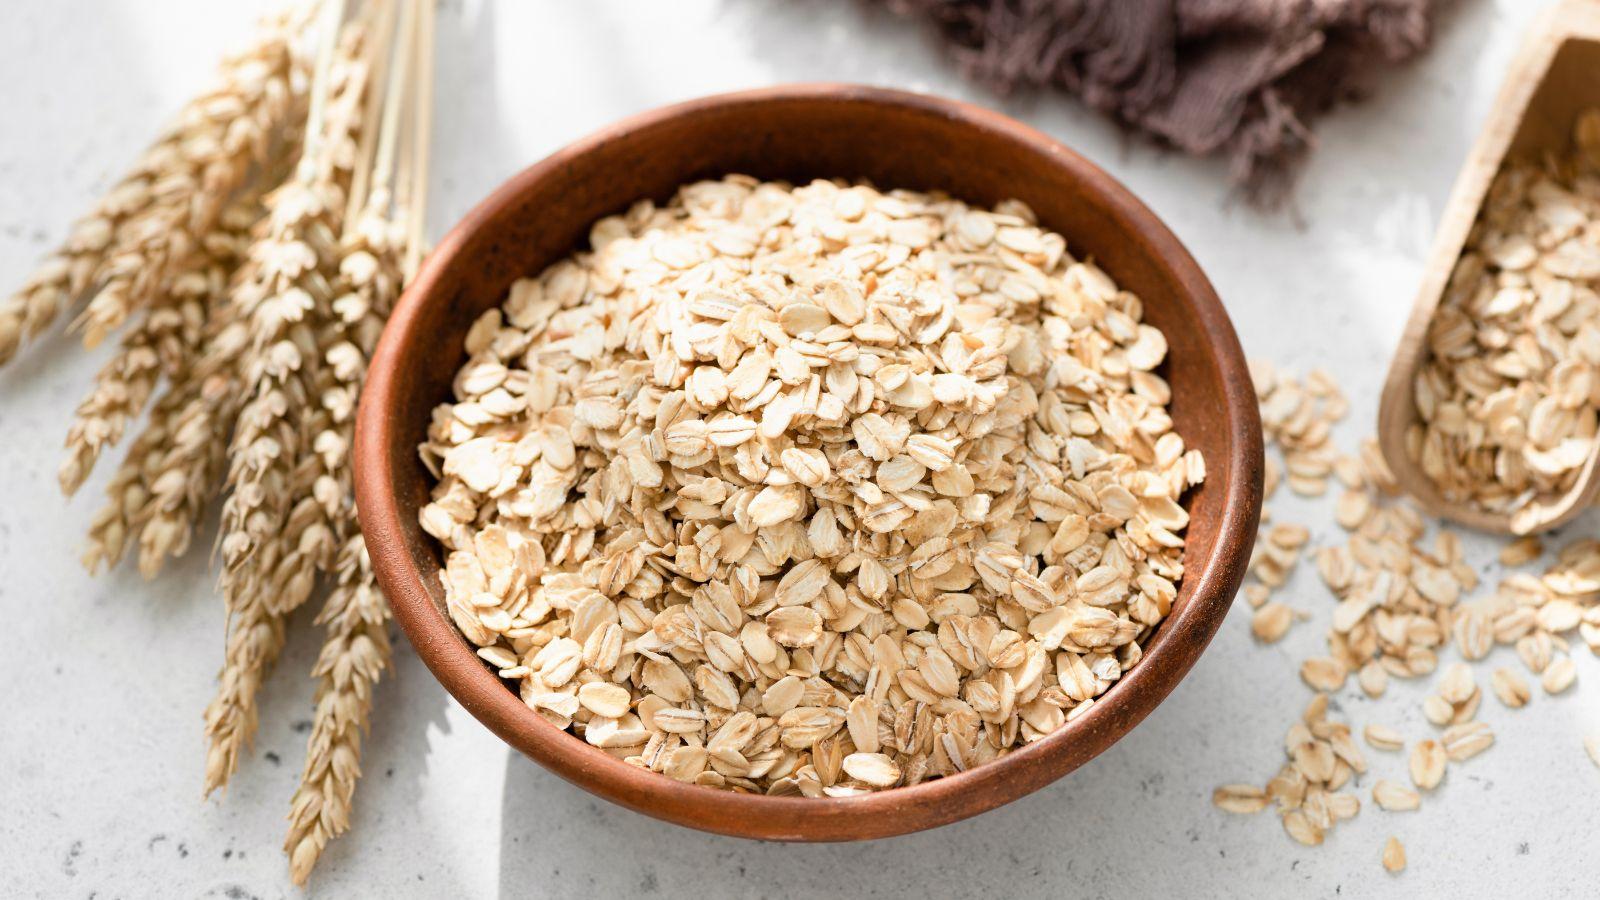 A bowl of oats surrounded by pieces of oats and a whole oat stalk.